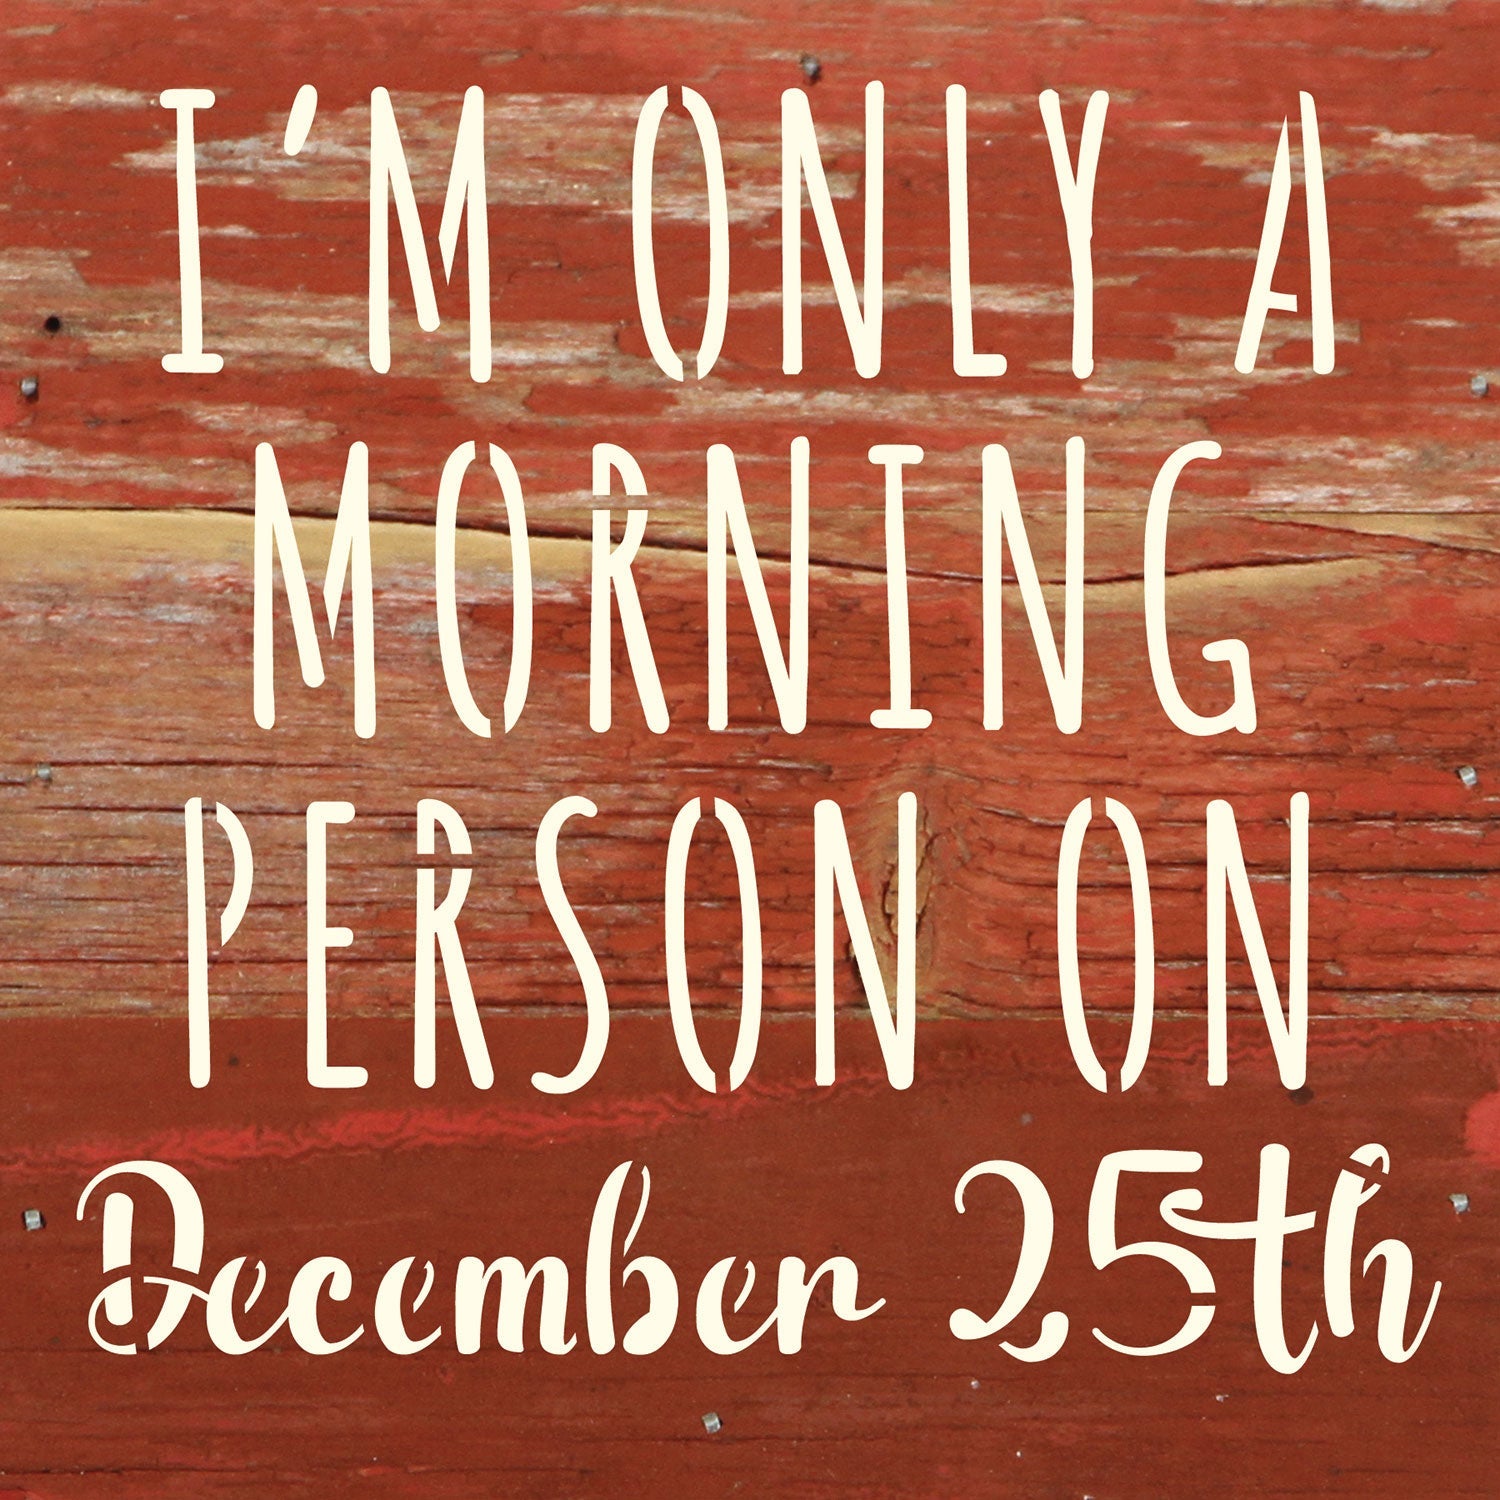 I am only a morning person on December 25th / 6x6 Reclaimed Wood Wall Decor Sign